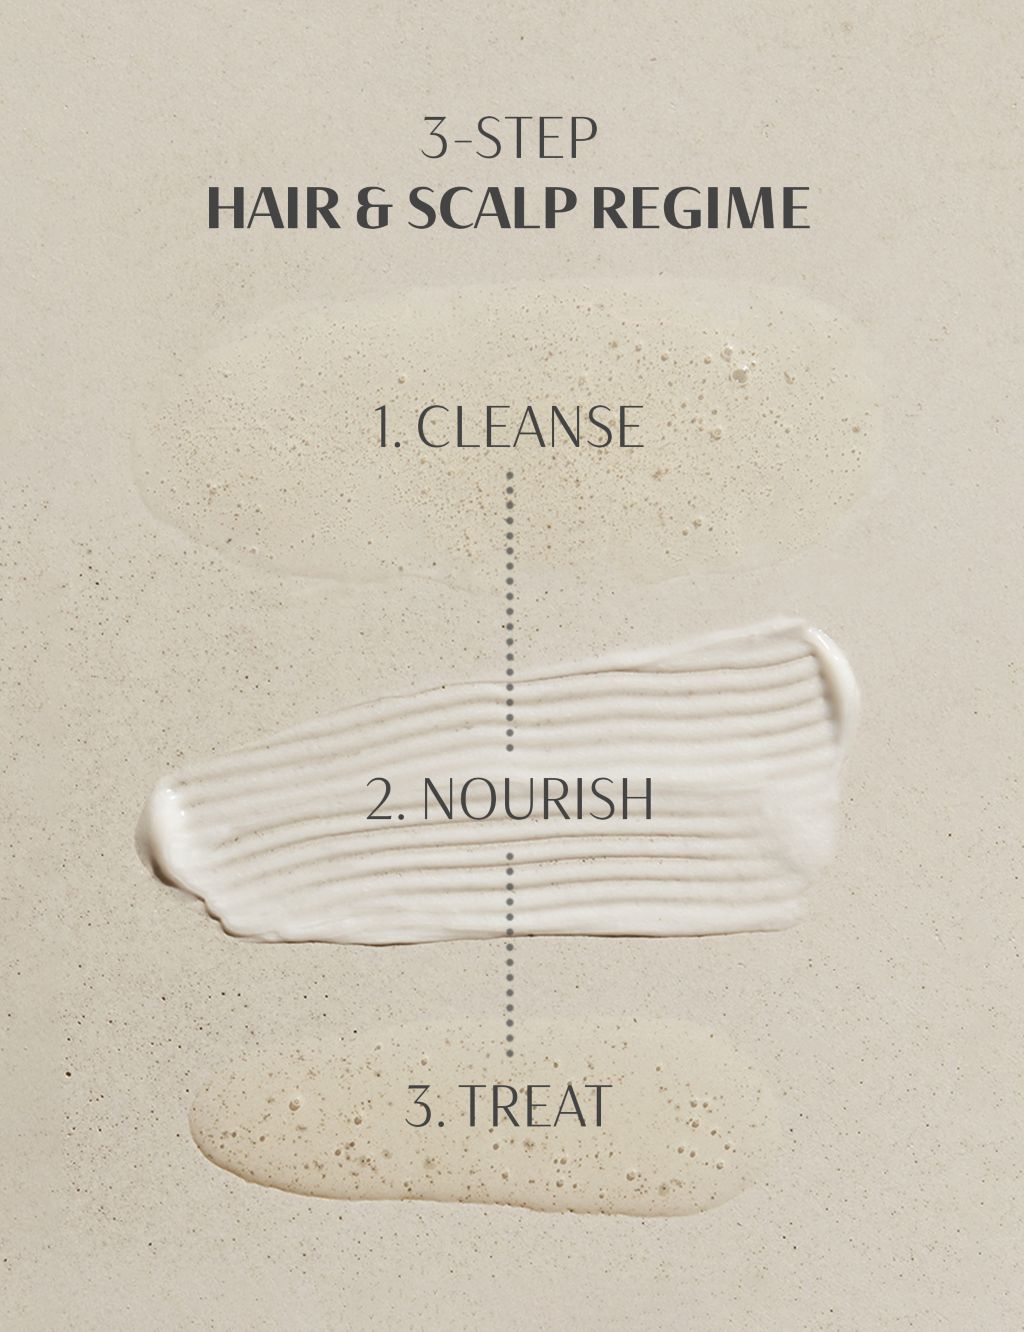 Give Me Strength Hair & Scalp Regime 2 of 7